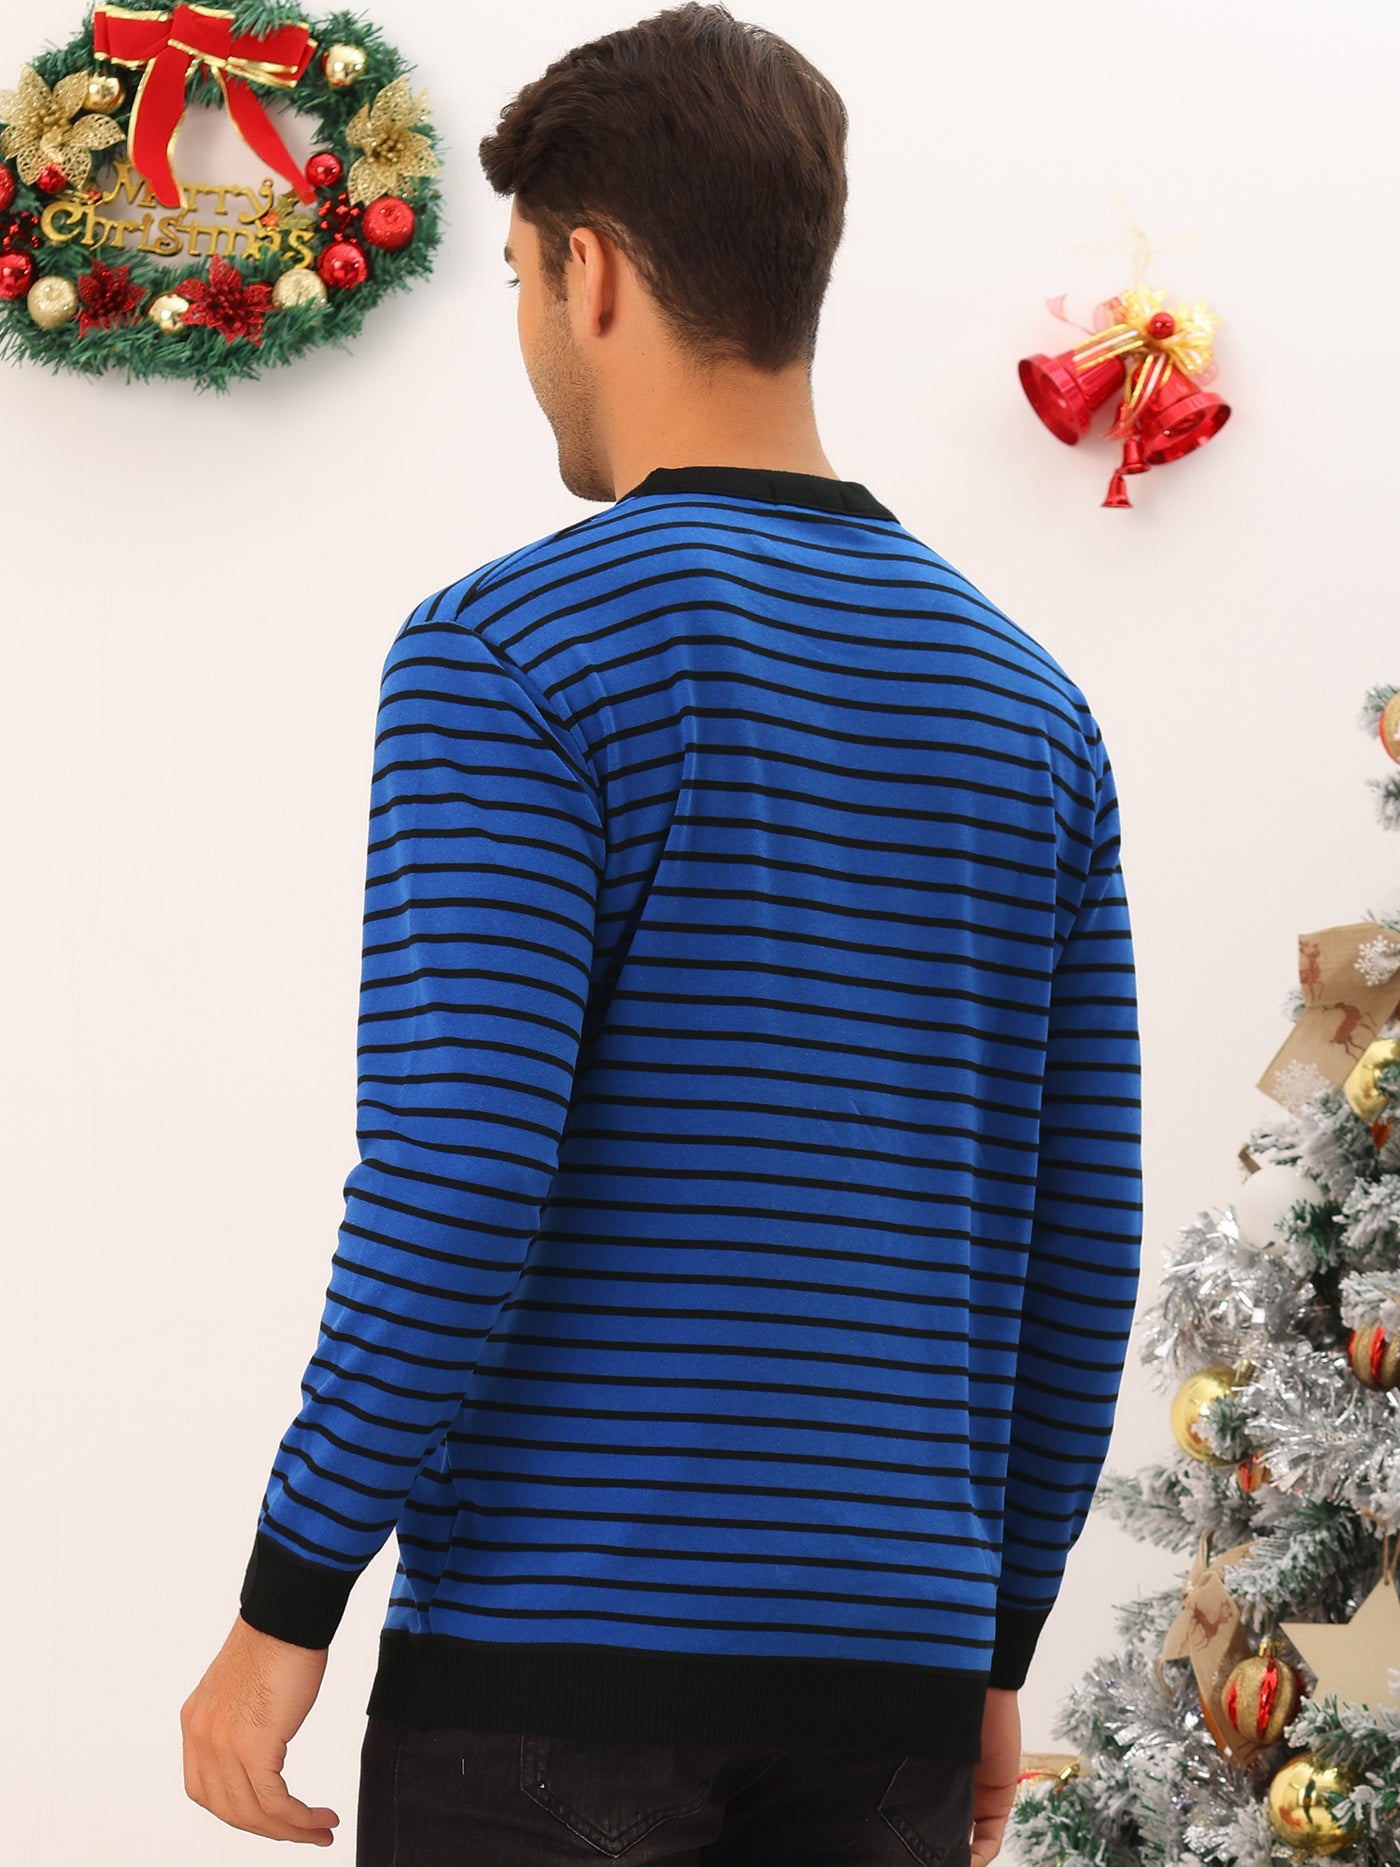 Bublédon Striped Sweaters for Men's Long Sleeves Round Neck Color Block Knit Top Pullover